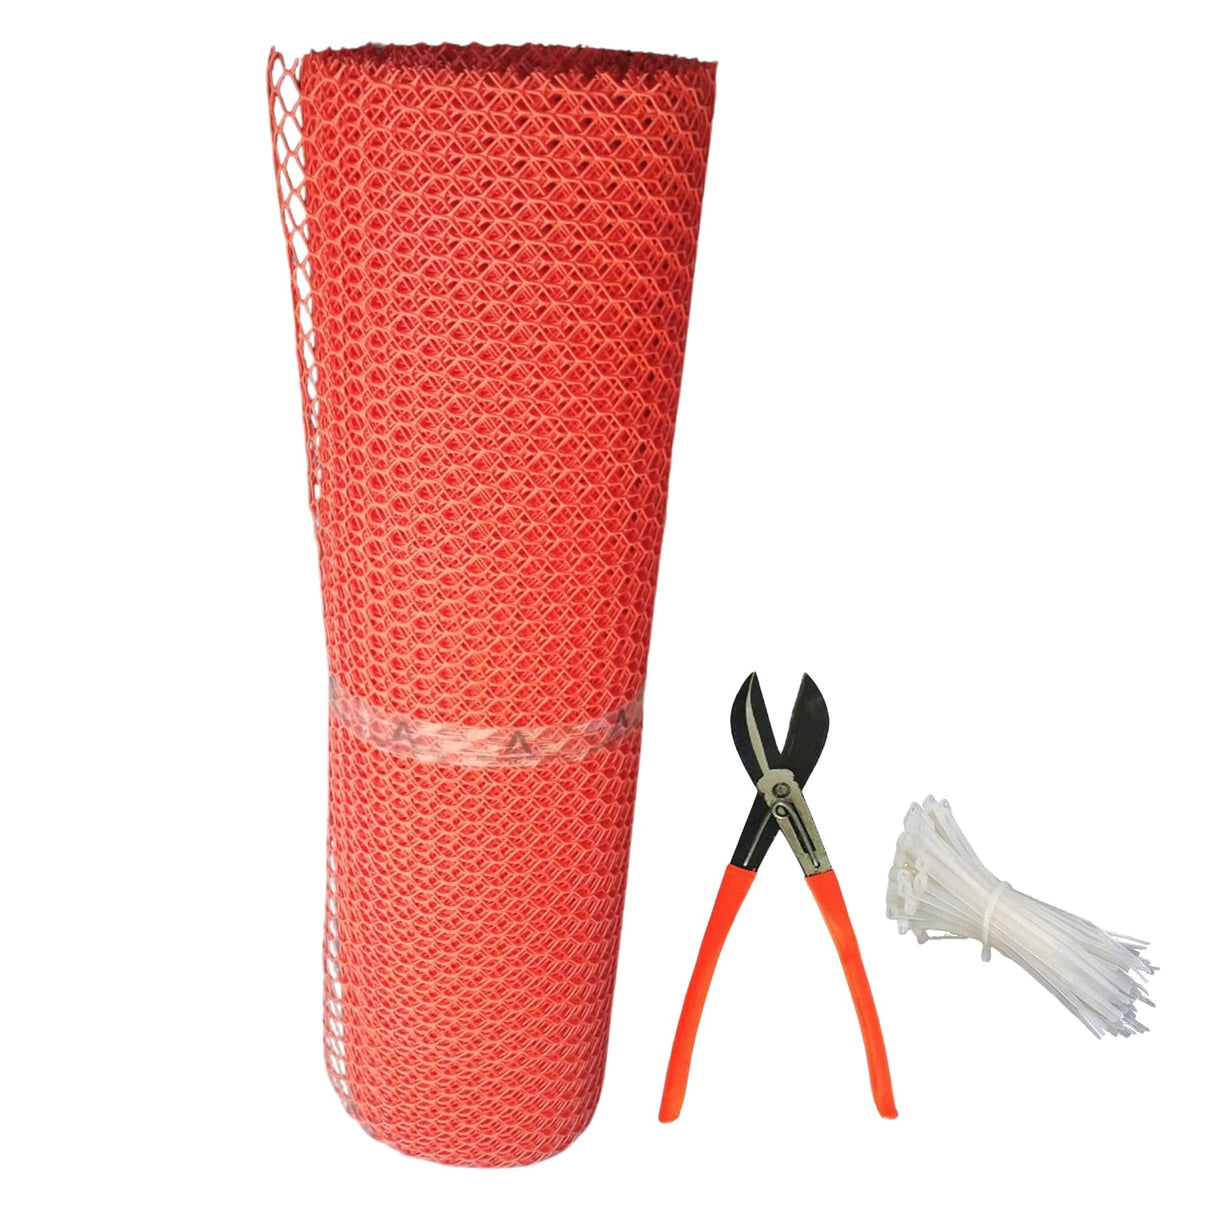 Singhal Tree Guard Net, Garden Fencing Net Virgin Plastic with 1 Cutter and 50 PVC Tags (Red, 4 ft x 15 ft)